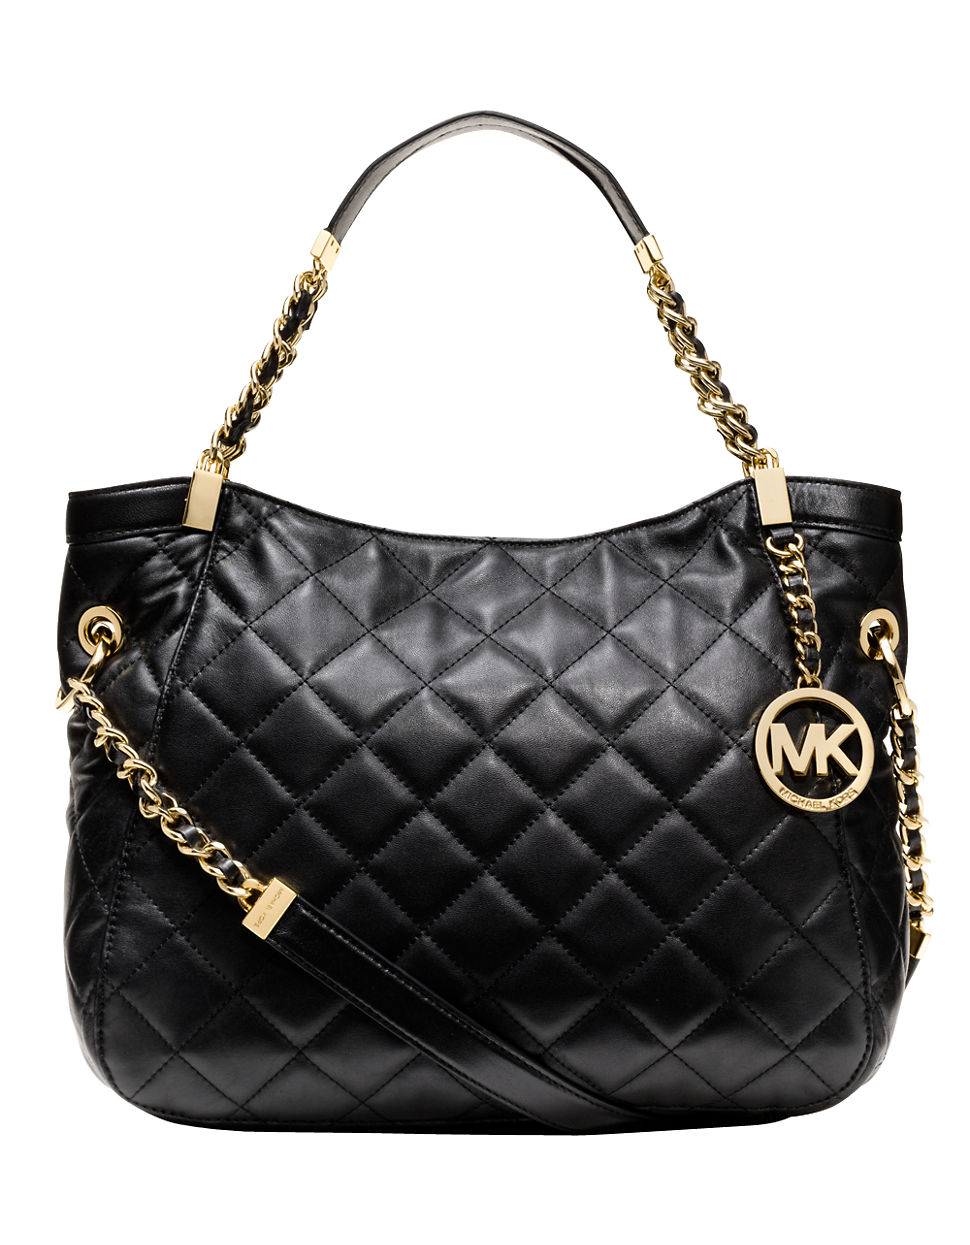 Lyst - Michael Michael Kors Susanna Quilted Leather Medium Tote Bag in ...